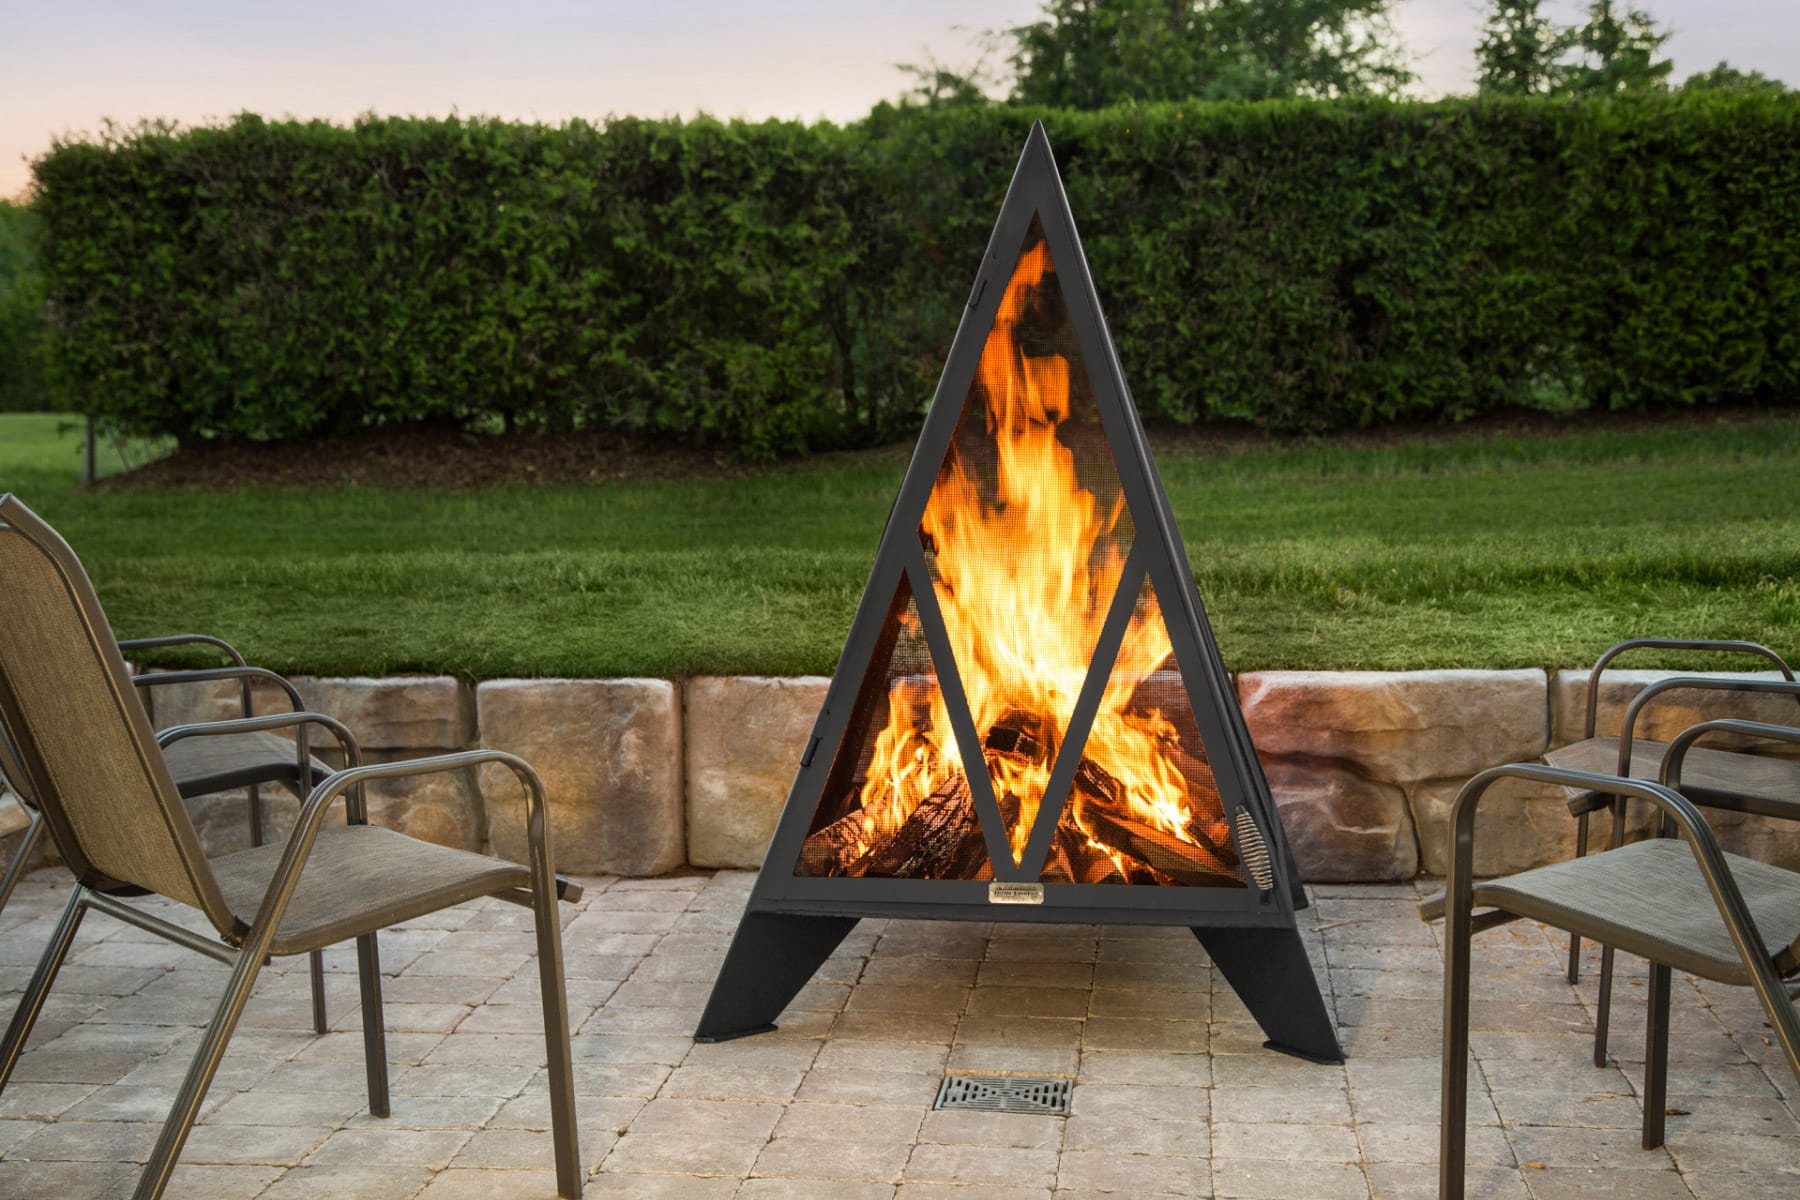 Pyramid fire pit on a patio in summer